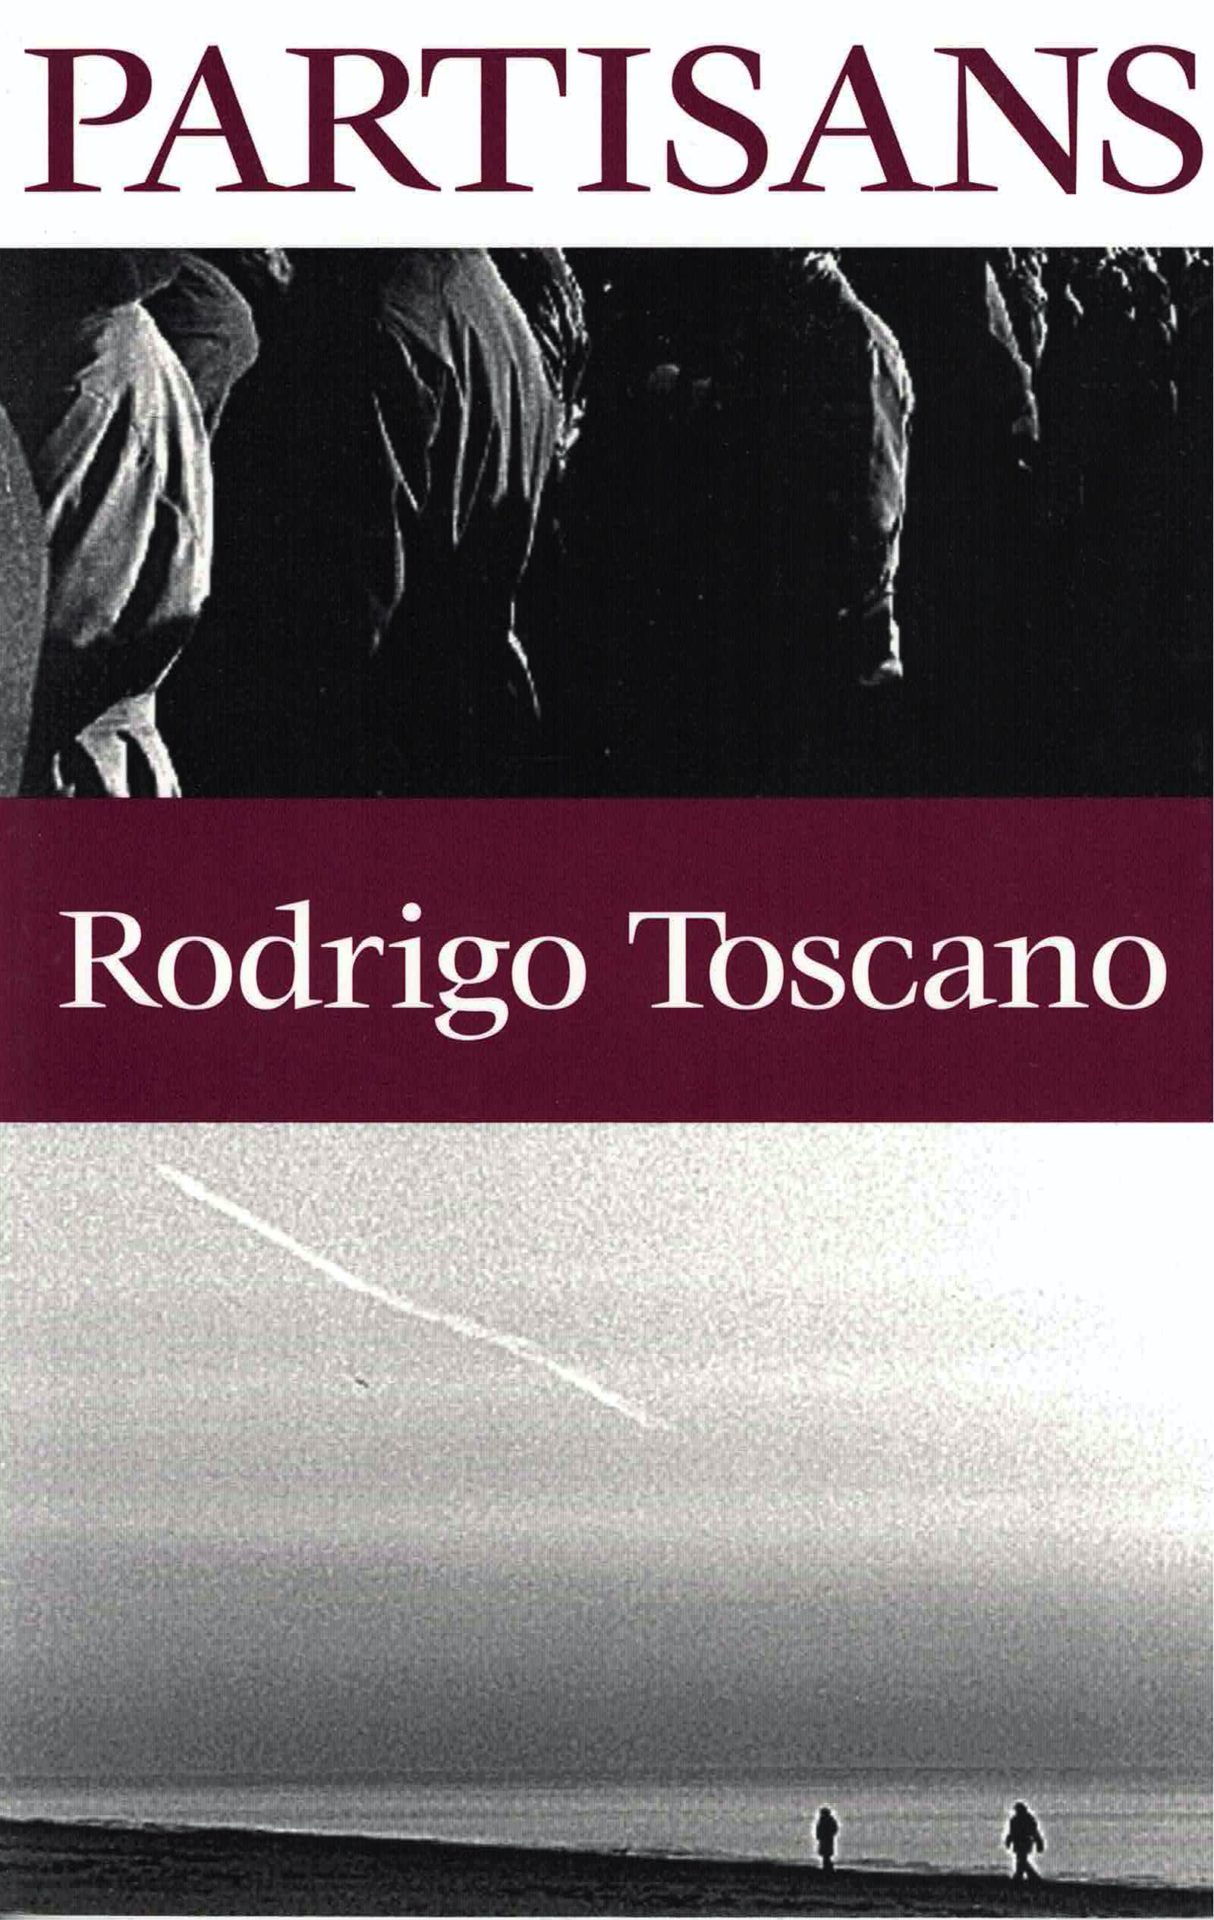 cover of Partisans by Rodrigo Toscano, b&w landscape of two people walking on the beach along bottom half of cover, close of of people standing in a crowd along the top half